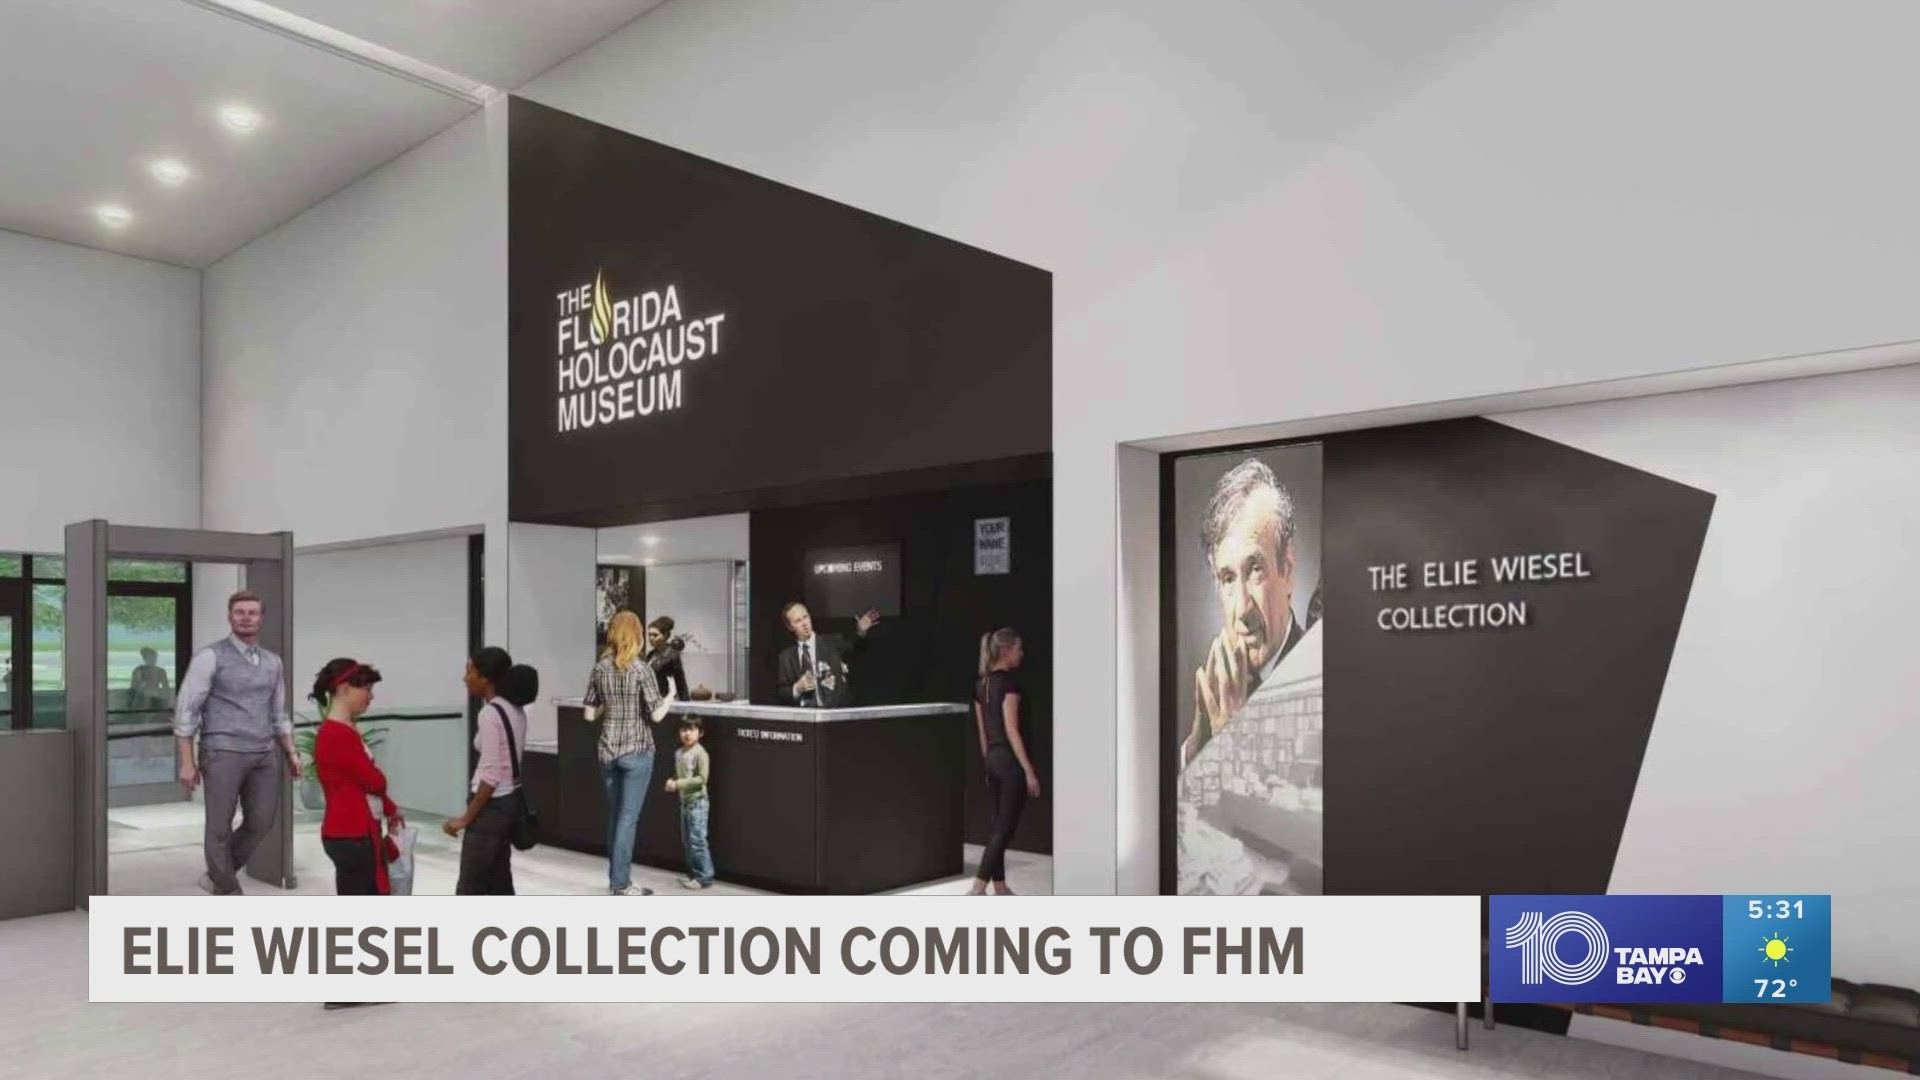 The museum says the writer's collection will be phased in over a number of years, but the redesign and construction are already underway.